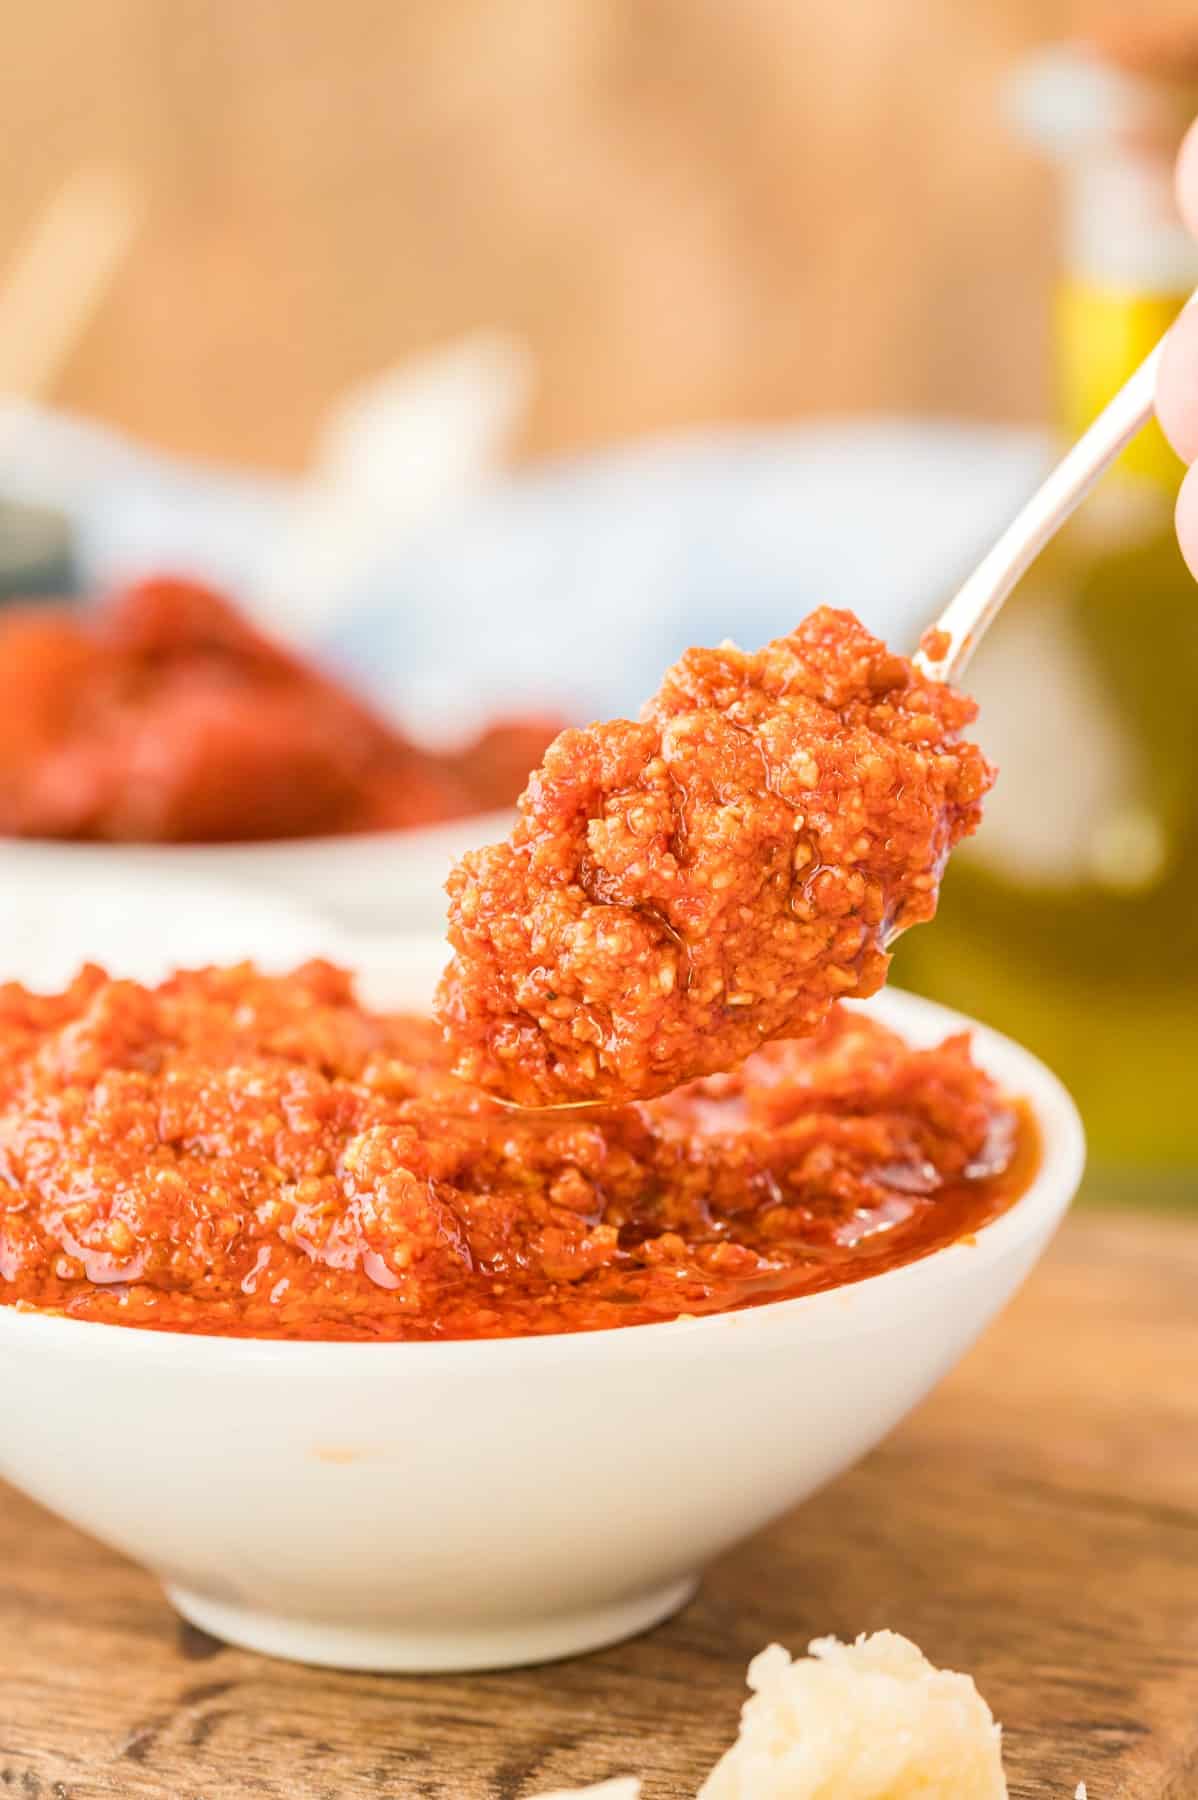 Spoonful of red pesto from a bowl